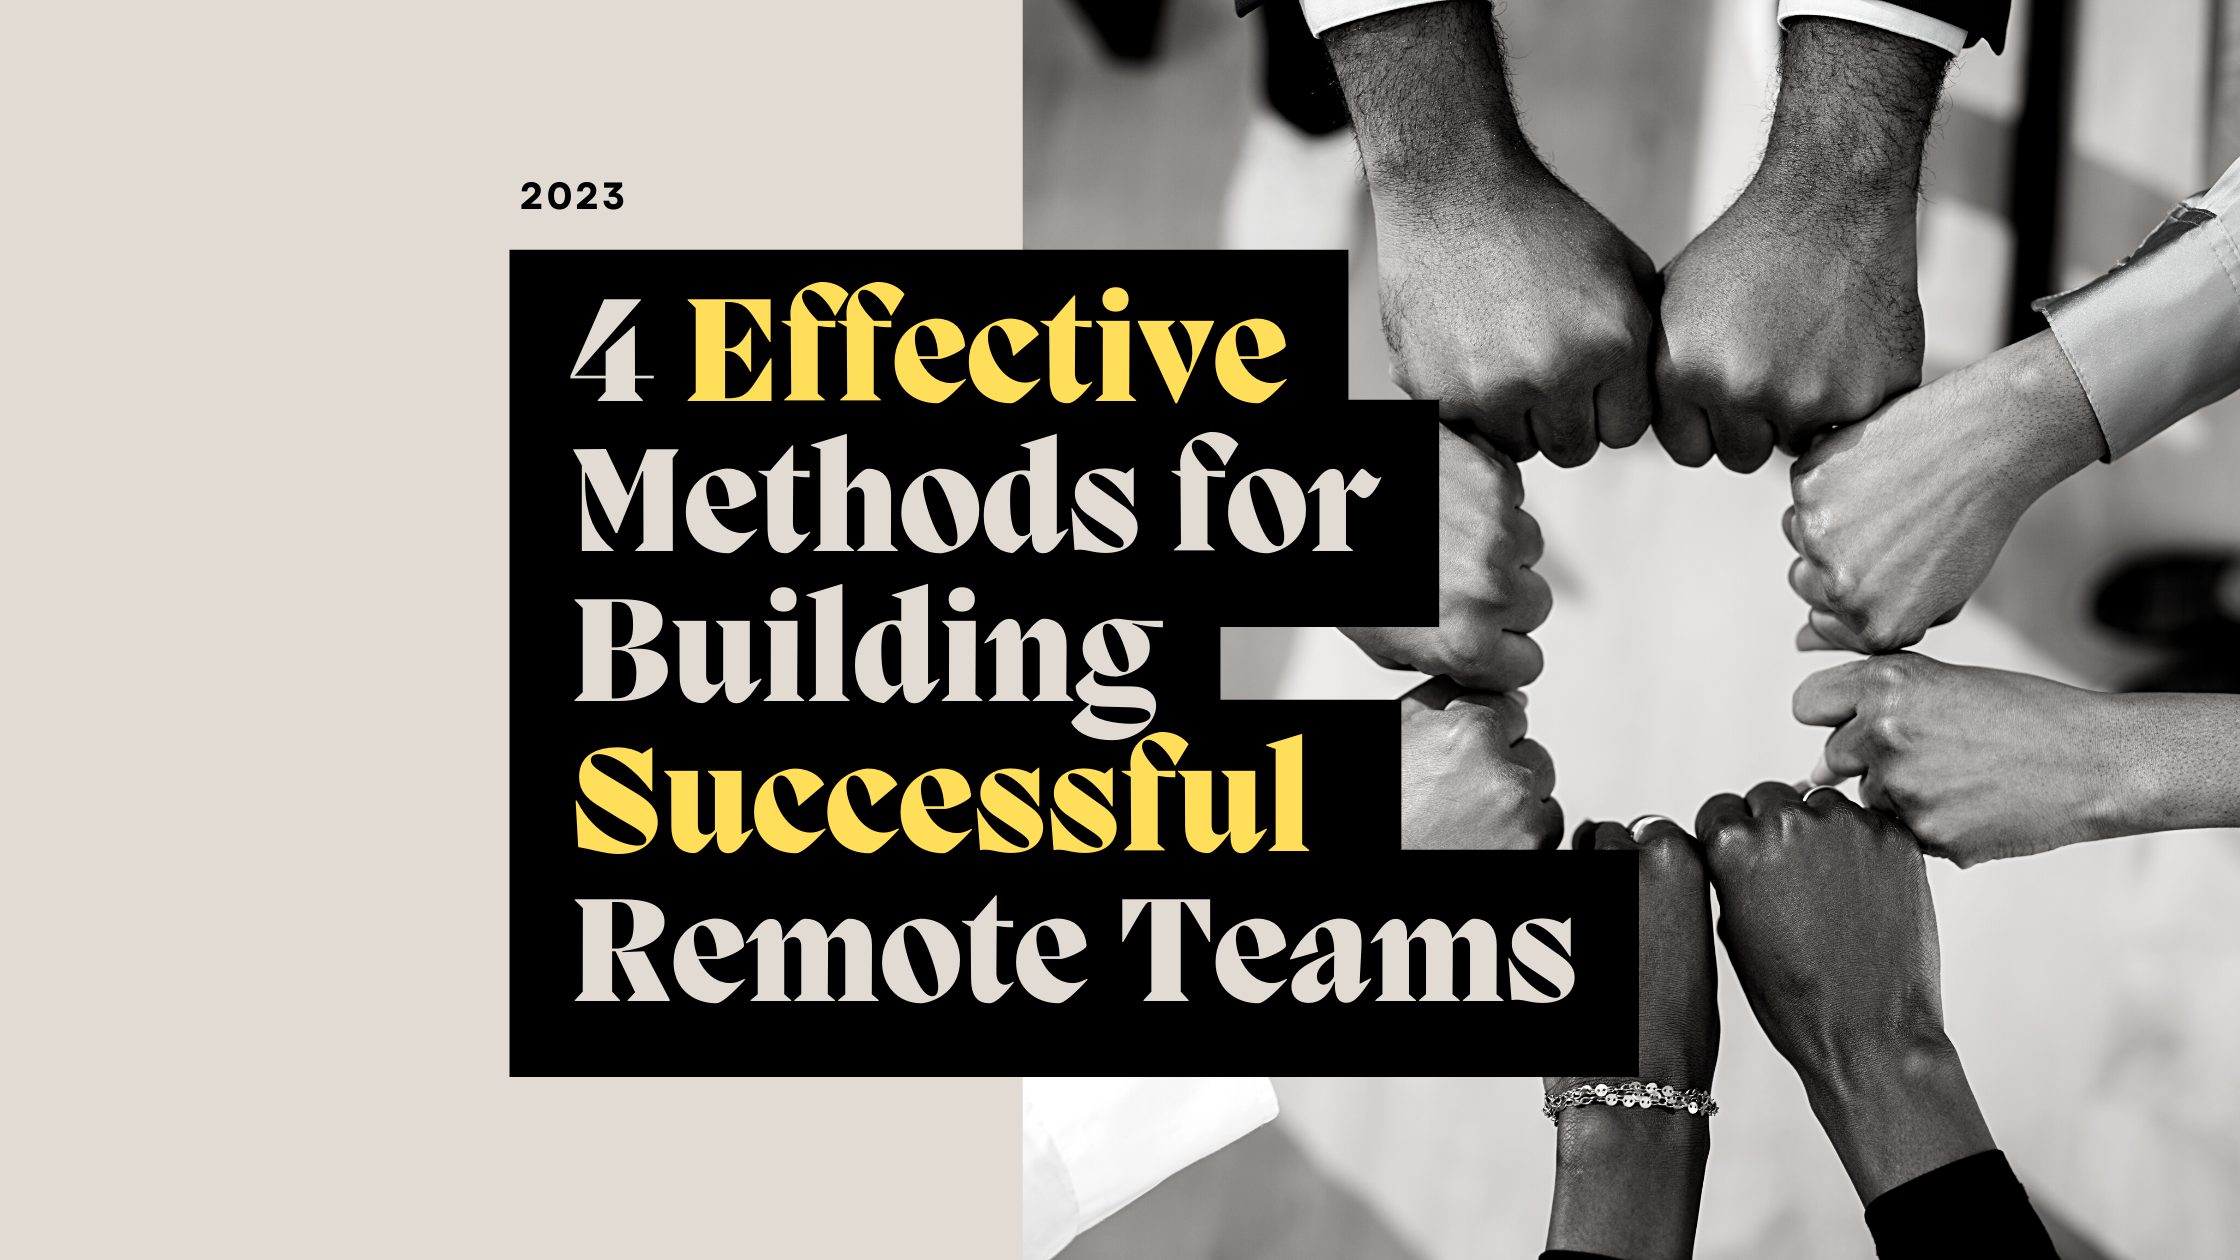 updating- successful remote teams for 2023